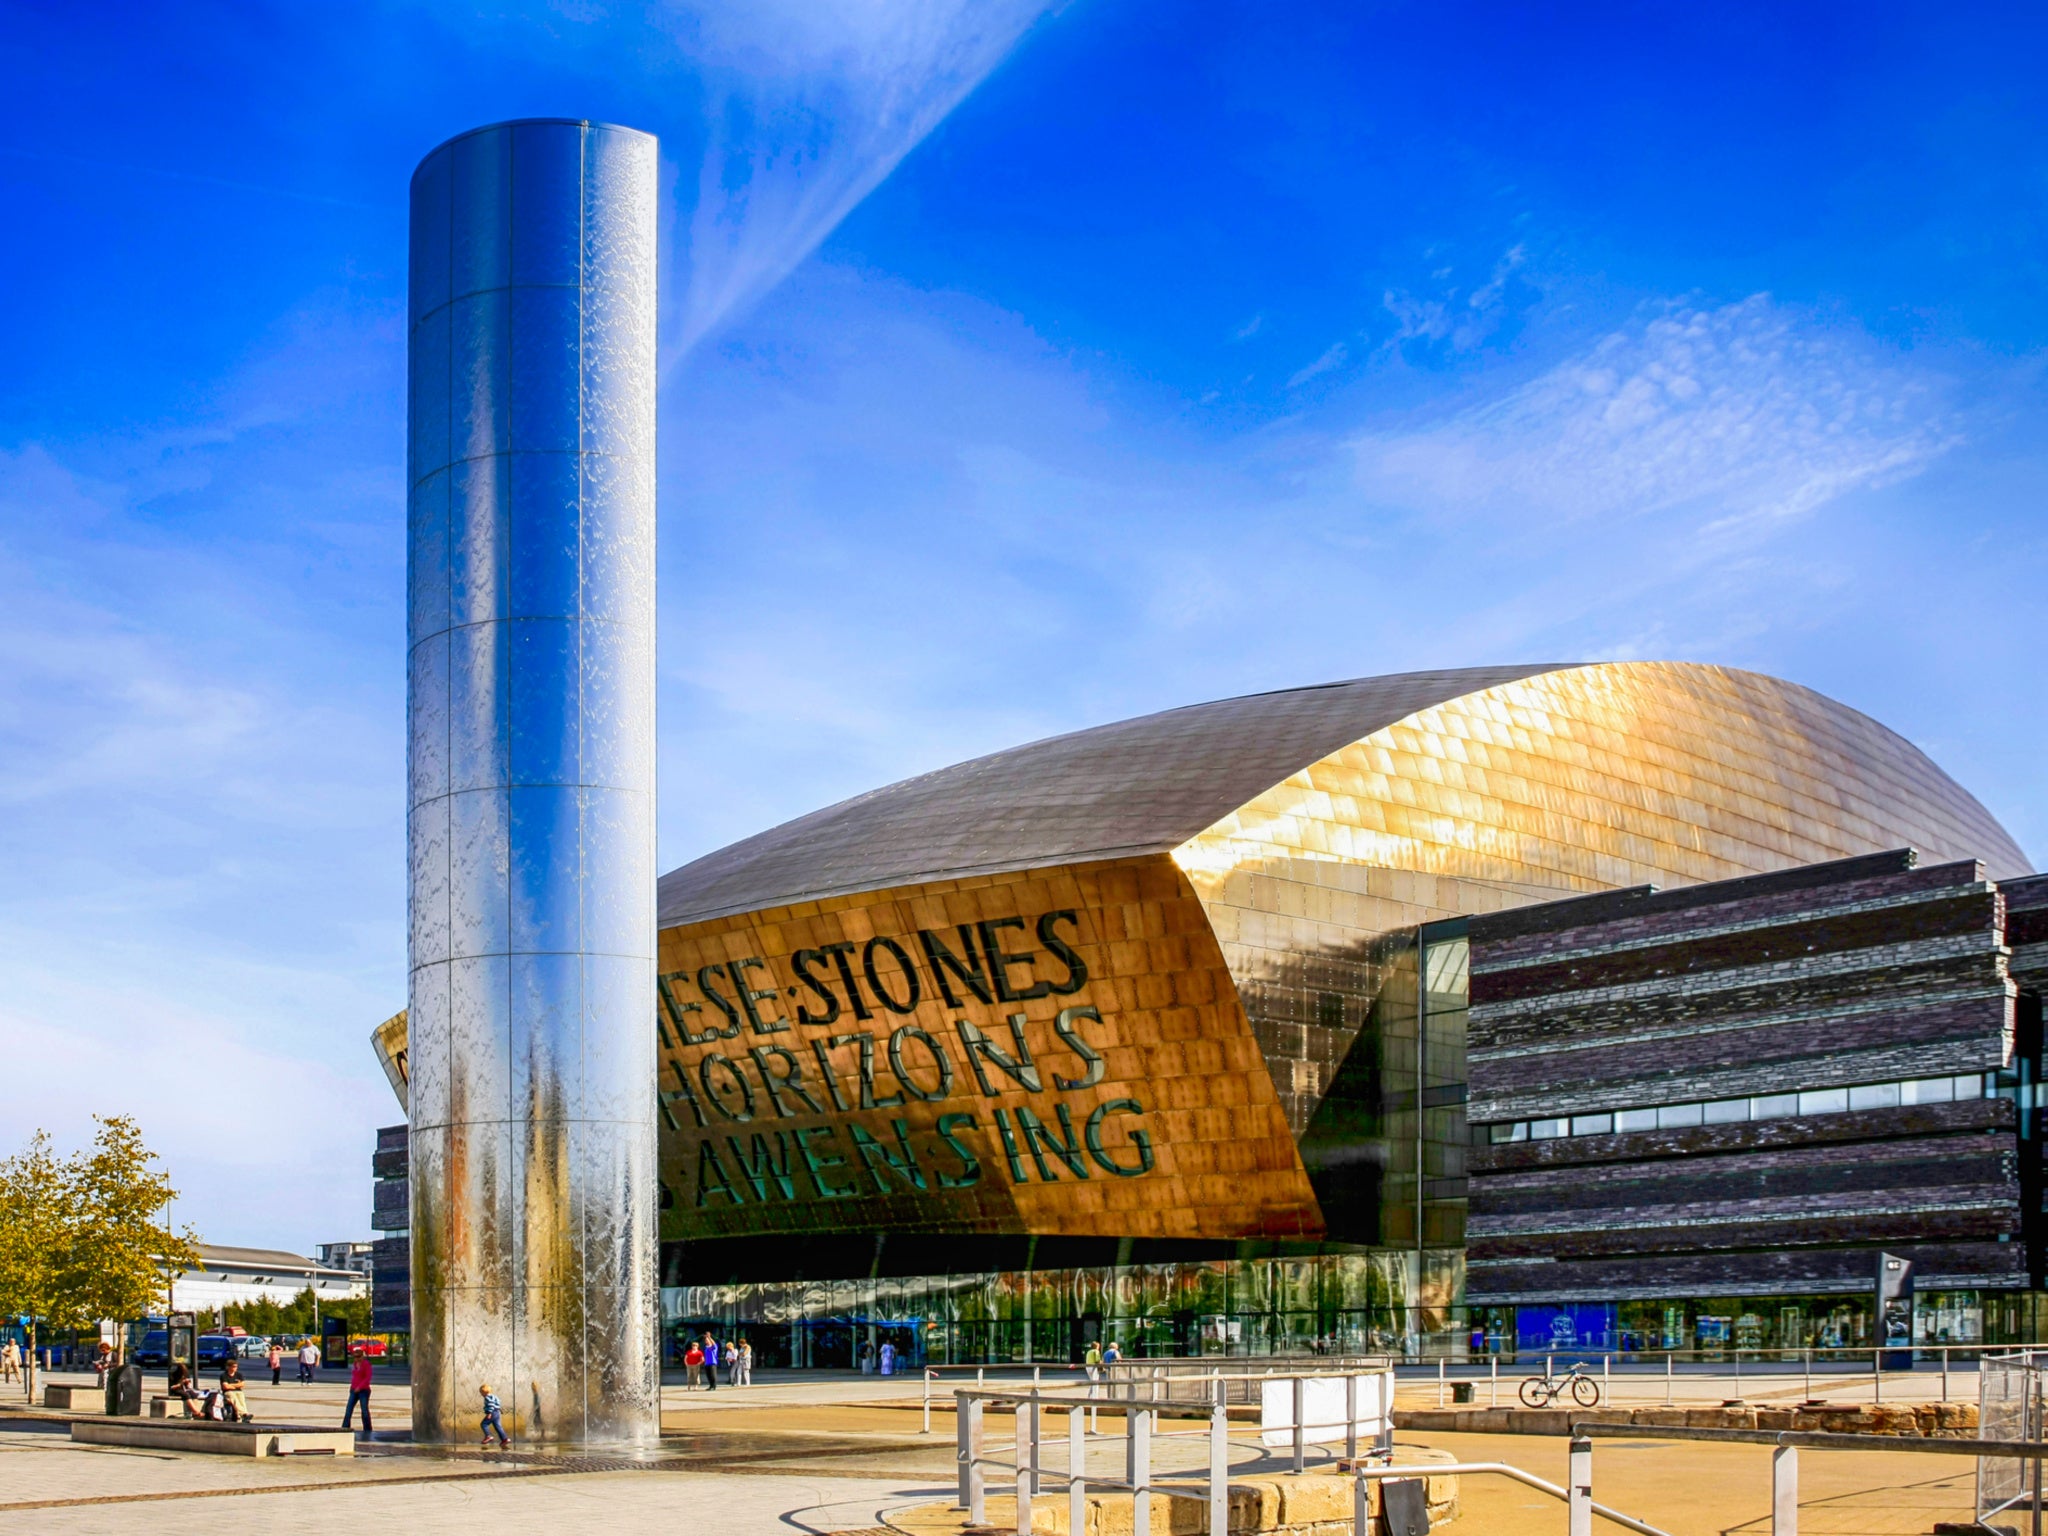 The Wales Millennium Centre is a mesmerising wave of bronze